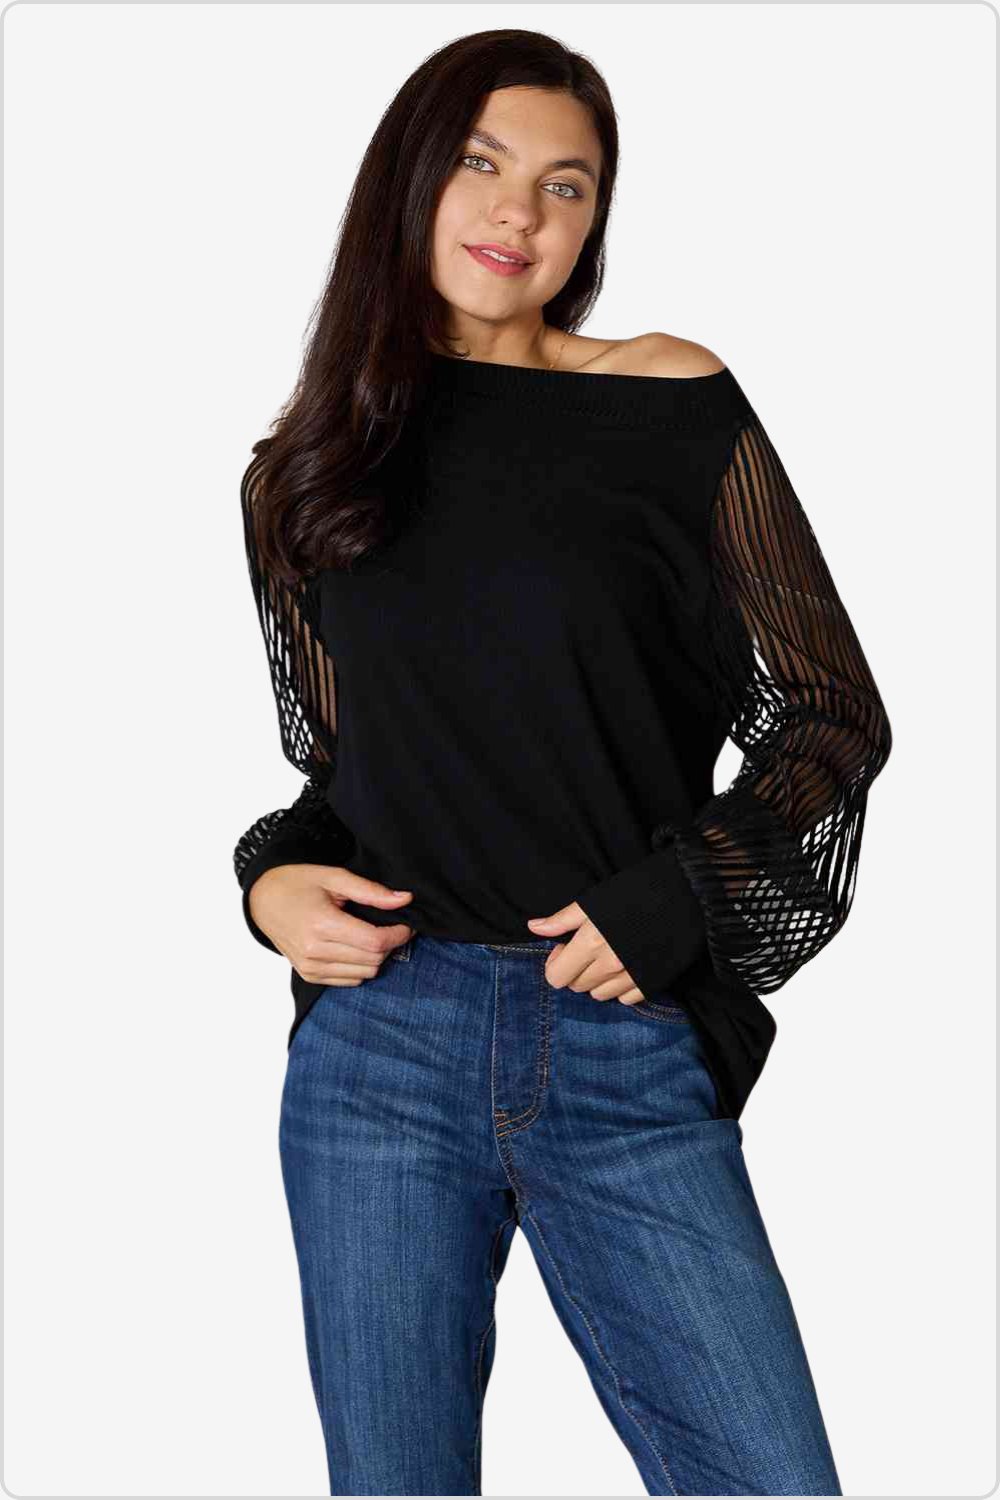 Versatile Blouse Styled for Both Casual and Formal Looks